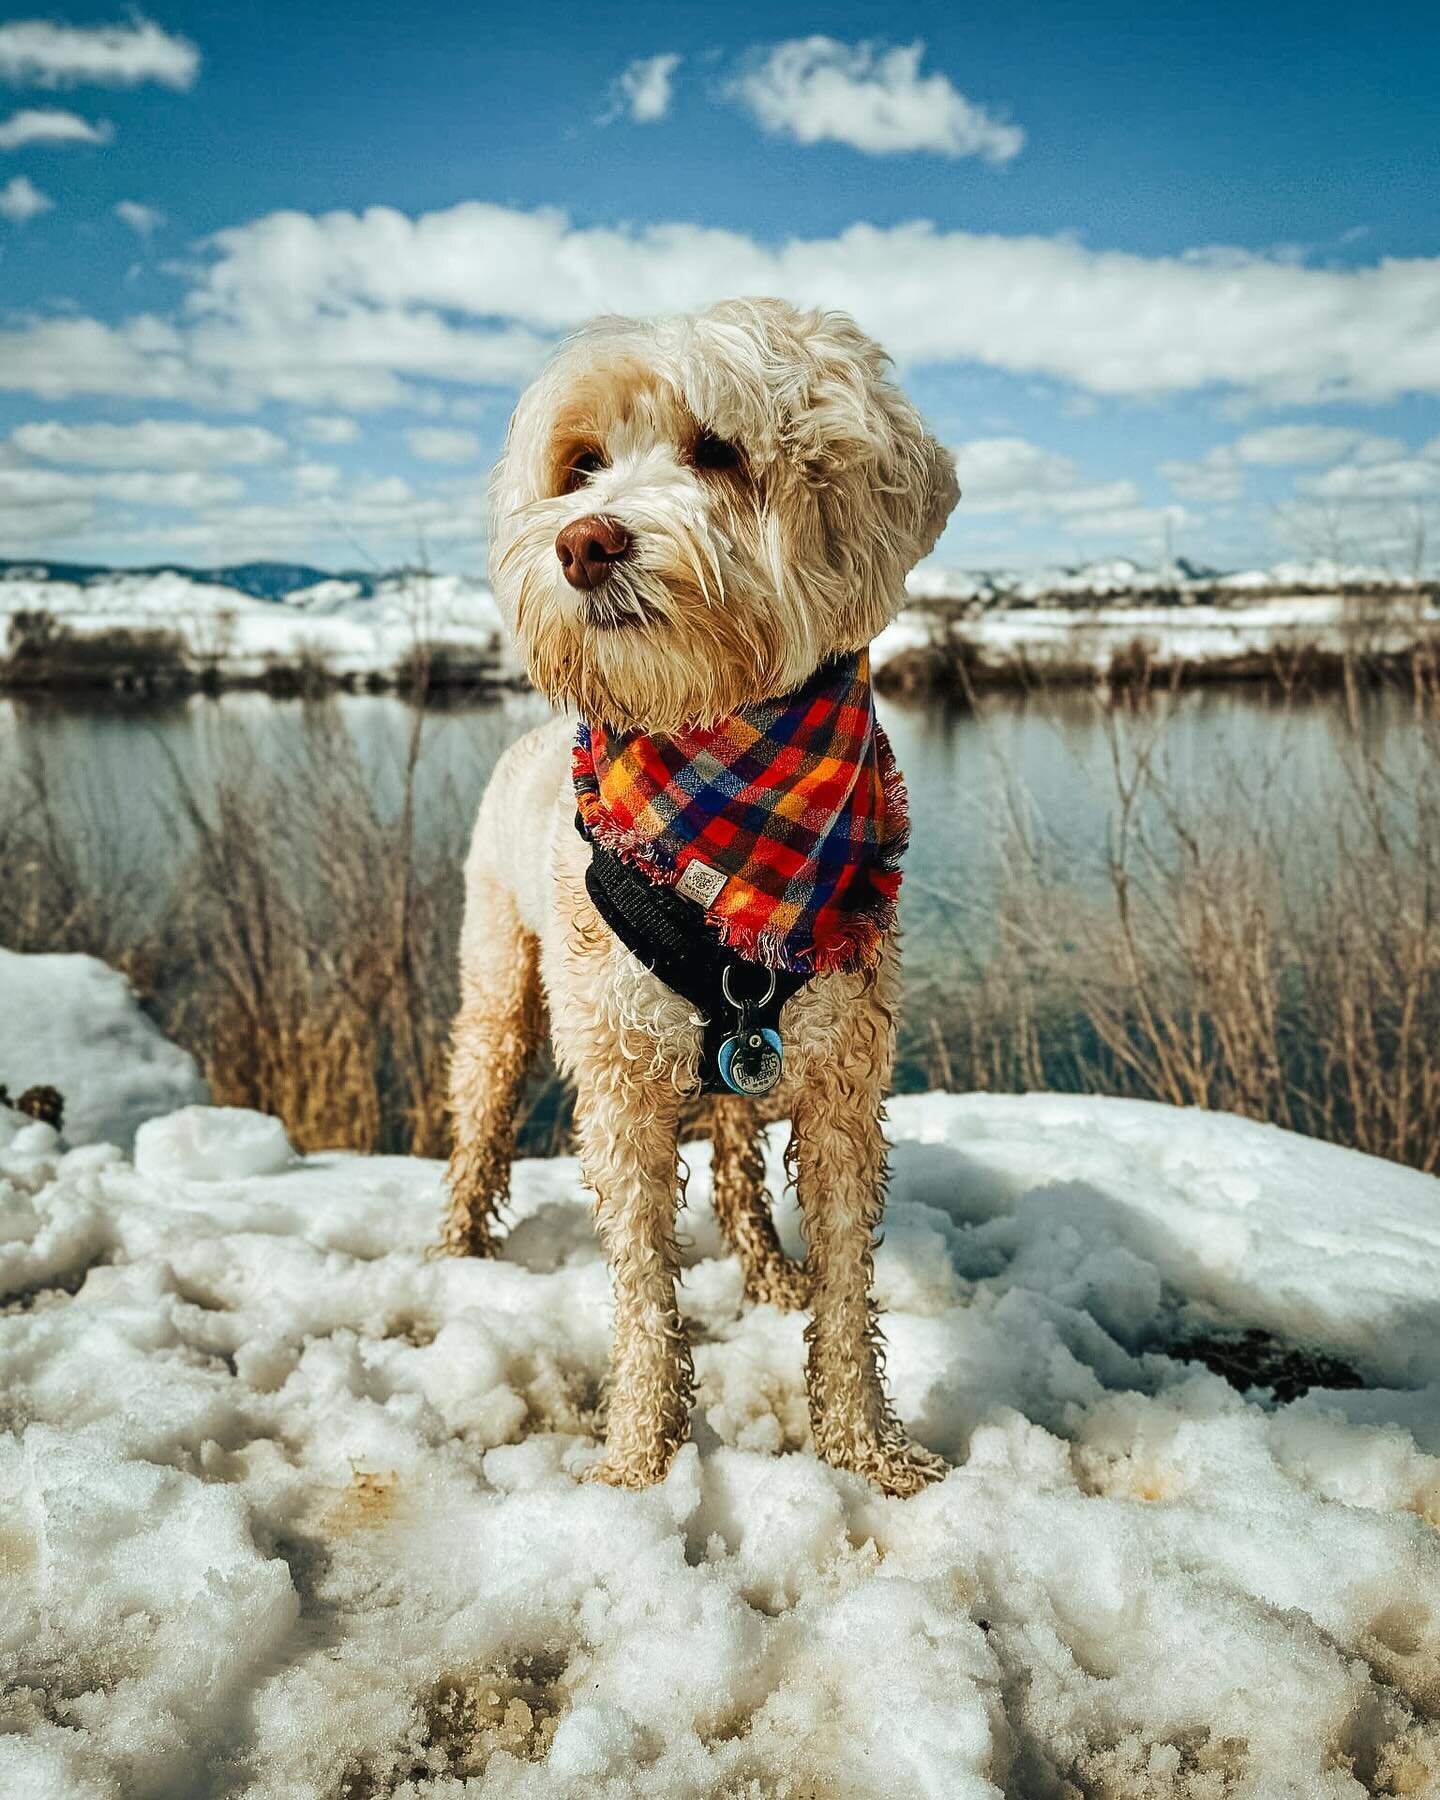 Be the source of brightness on a cold or gloomy day ✨

Pierogi had that right idea to sport the Blaze bandana on his snowy adventure! The weather is all over the place right now, so it only makes sense to wear a vibrant and cozy bandana to brighten y